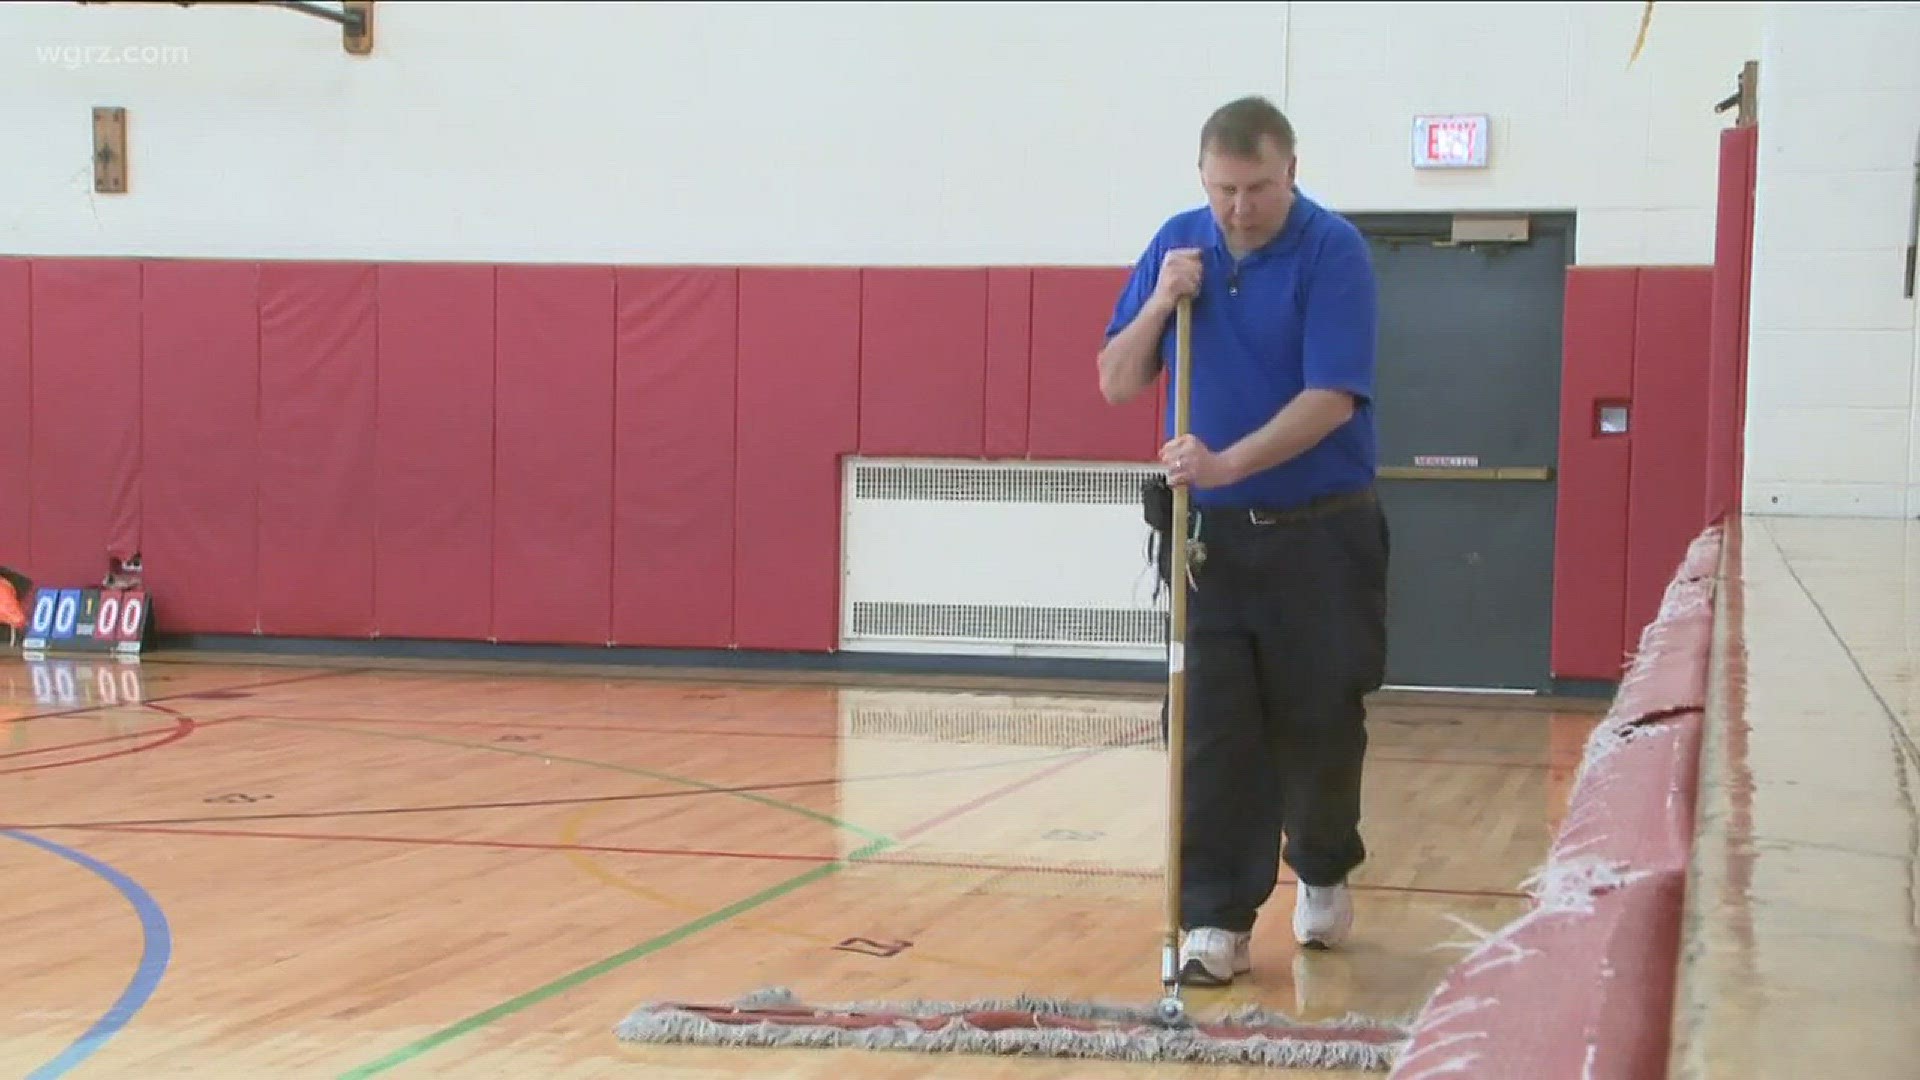 WNY'ER Cintas Janitor Of The Year